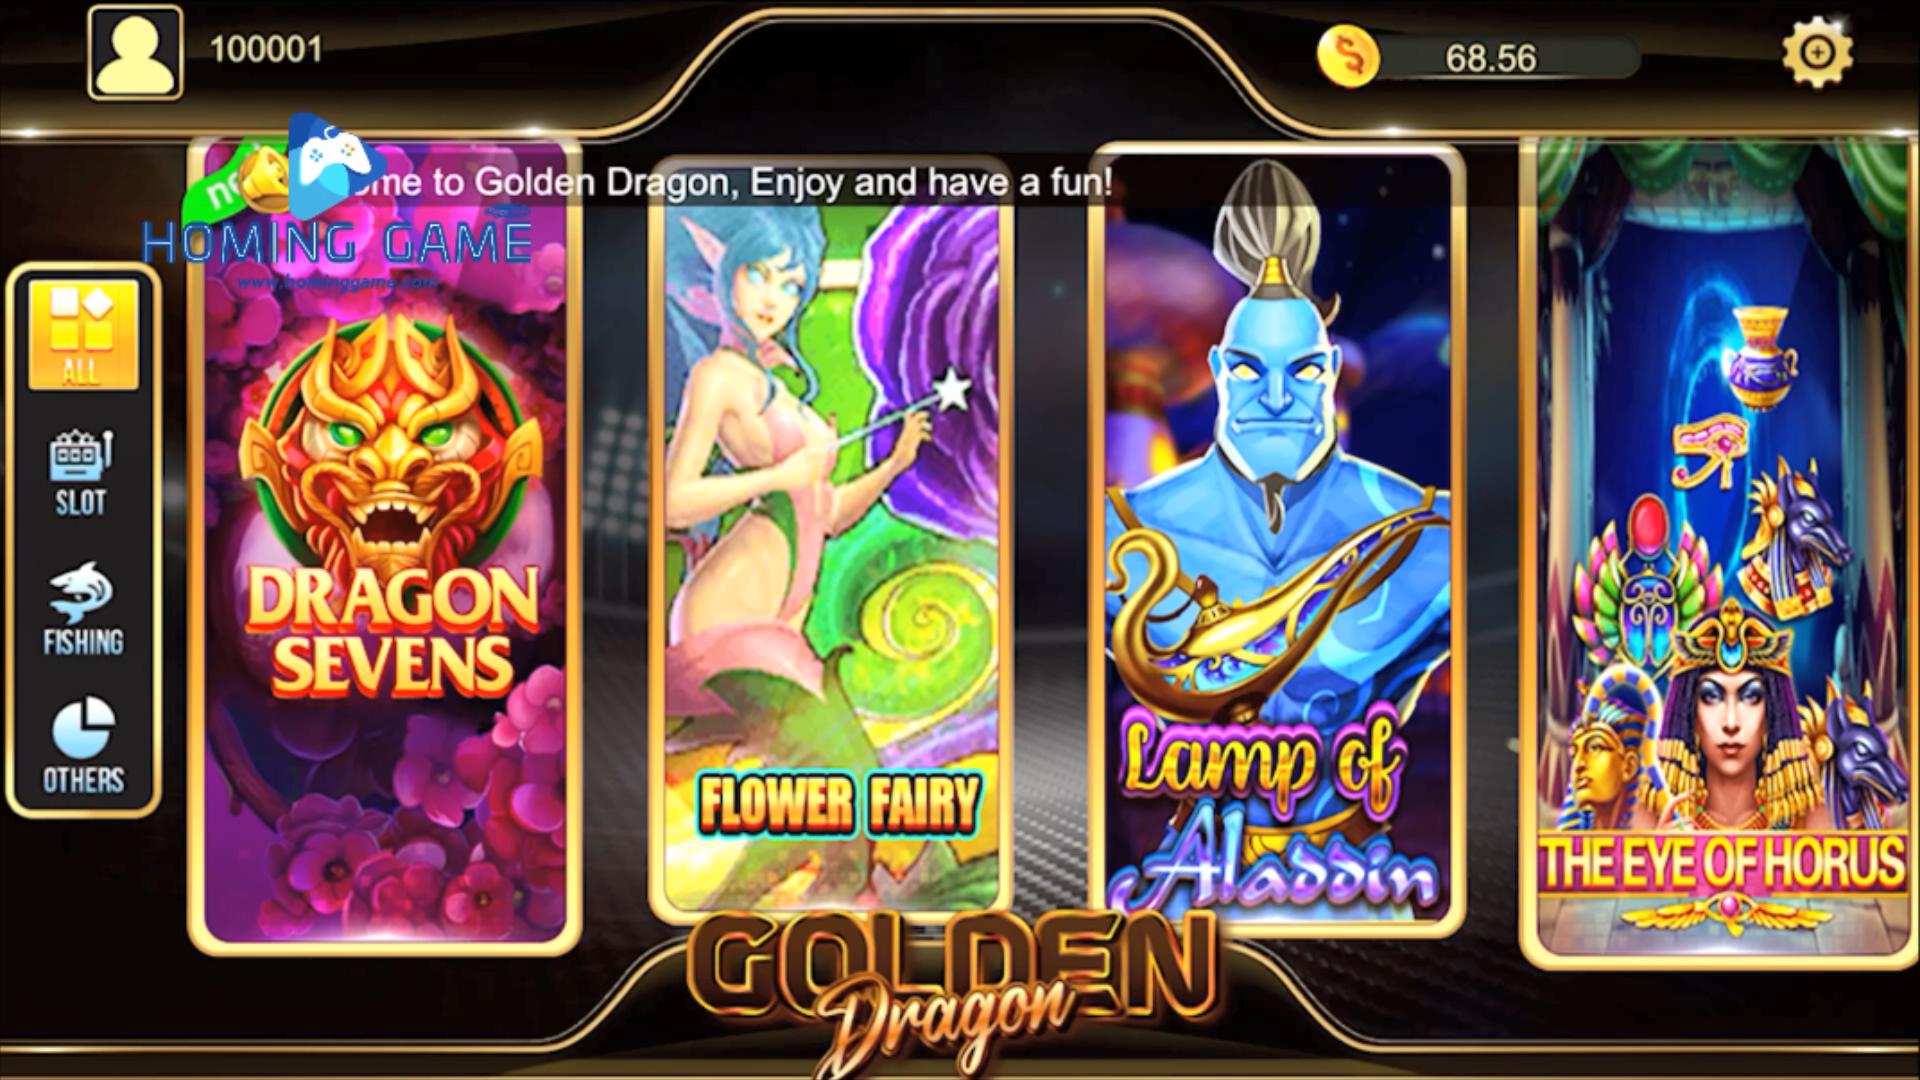 Dragon Sevens |Wheel of fortune|Planet Moolah| Panda Master |Flower fairy Online Golden Dragon gaming develop by HomingGame(Order call whatsapp:+8618688409495),Golden dragon is one of best online mobile gaming system in USA,panda master online game,panda master online mobile game,panda master online mobile game,download panda master online gaming apps,MysteryDragons online gaming,MysteryDragons online slot gaming,online fishing game apps,online slot game apps,online gaming system,usa best online fishing game apps,download online fishing game apps,download online slot game apps,download online gaming system,USA best fishing table game machine supplier and manufacturer by HomingGame Specialize in manufacture fishing Game(Order Call Whatsapp:+8618688409495),fishing game,fishing table,fishing table game machine,fishing game machine,fishing arcade game machine,fish hunter fishing game machine,upright table fishing game machine,standup fishing game machine,ocean king 3 fishing game machine,capatian america fishing game machine,tiger stirke fishing game machine,godzilla fishing game machine,rampage fishing game machine,dragon legend fishing game machine,ocean king,igs fishing game machine,electrical fishing game machine,usa fishing game machine,ocean king 2 fishing gam emachine,fishing game machine supplier,fishing game machine manufacturer,gaming machine,gambling machine,game machine,arcade game machine,coin operated game machine,indoor game machine,electrical game machine,amusement park game equipment,amusement machine,gaming,casino gaming machine,usa fishing game machine supplier,USA fishing table game machine manufacturer,fishing game cheats,fishing game skills,how to paly the fishing game machine,fishing game decoding,fishing game decoder box,hominggame,www.gametube.hk,hominggame fishing game,entertainment game machine,family entertainment game machine,arcade game machine for sale